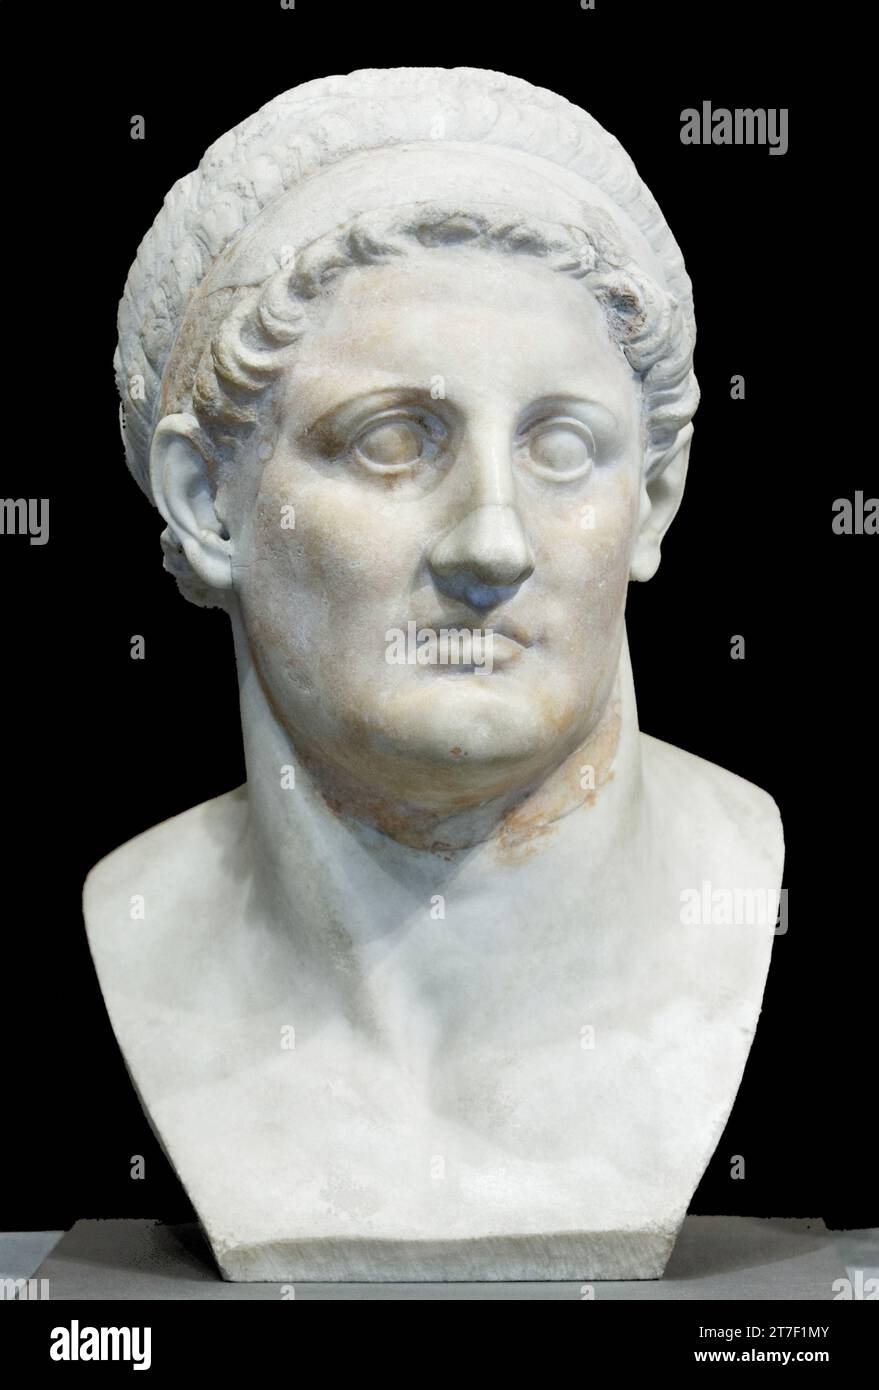 Ptolemy I Soter. Bust of the Macedonian Greek founder of the Ptolemaic Kingdom, Ptolemy the Savior; c. 367 BC-282 BC) Stock Photo